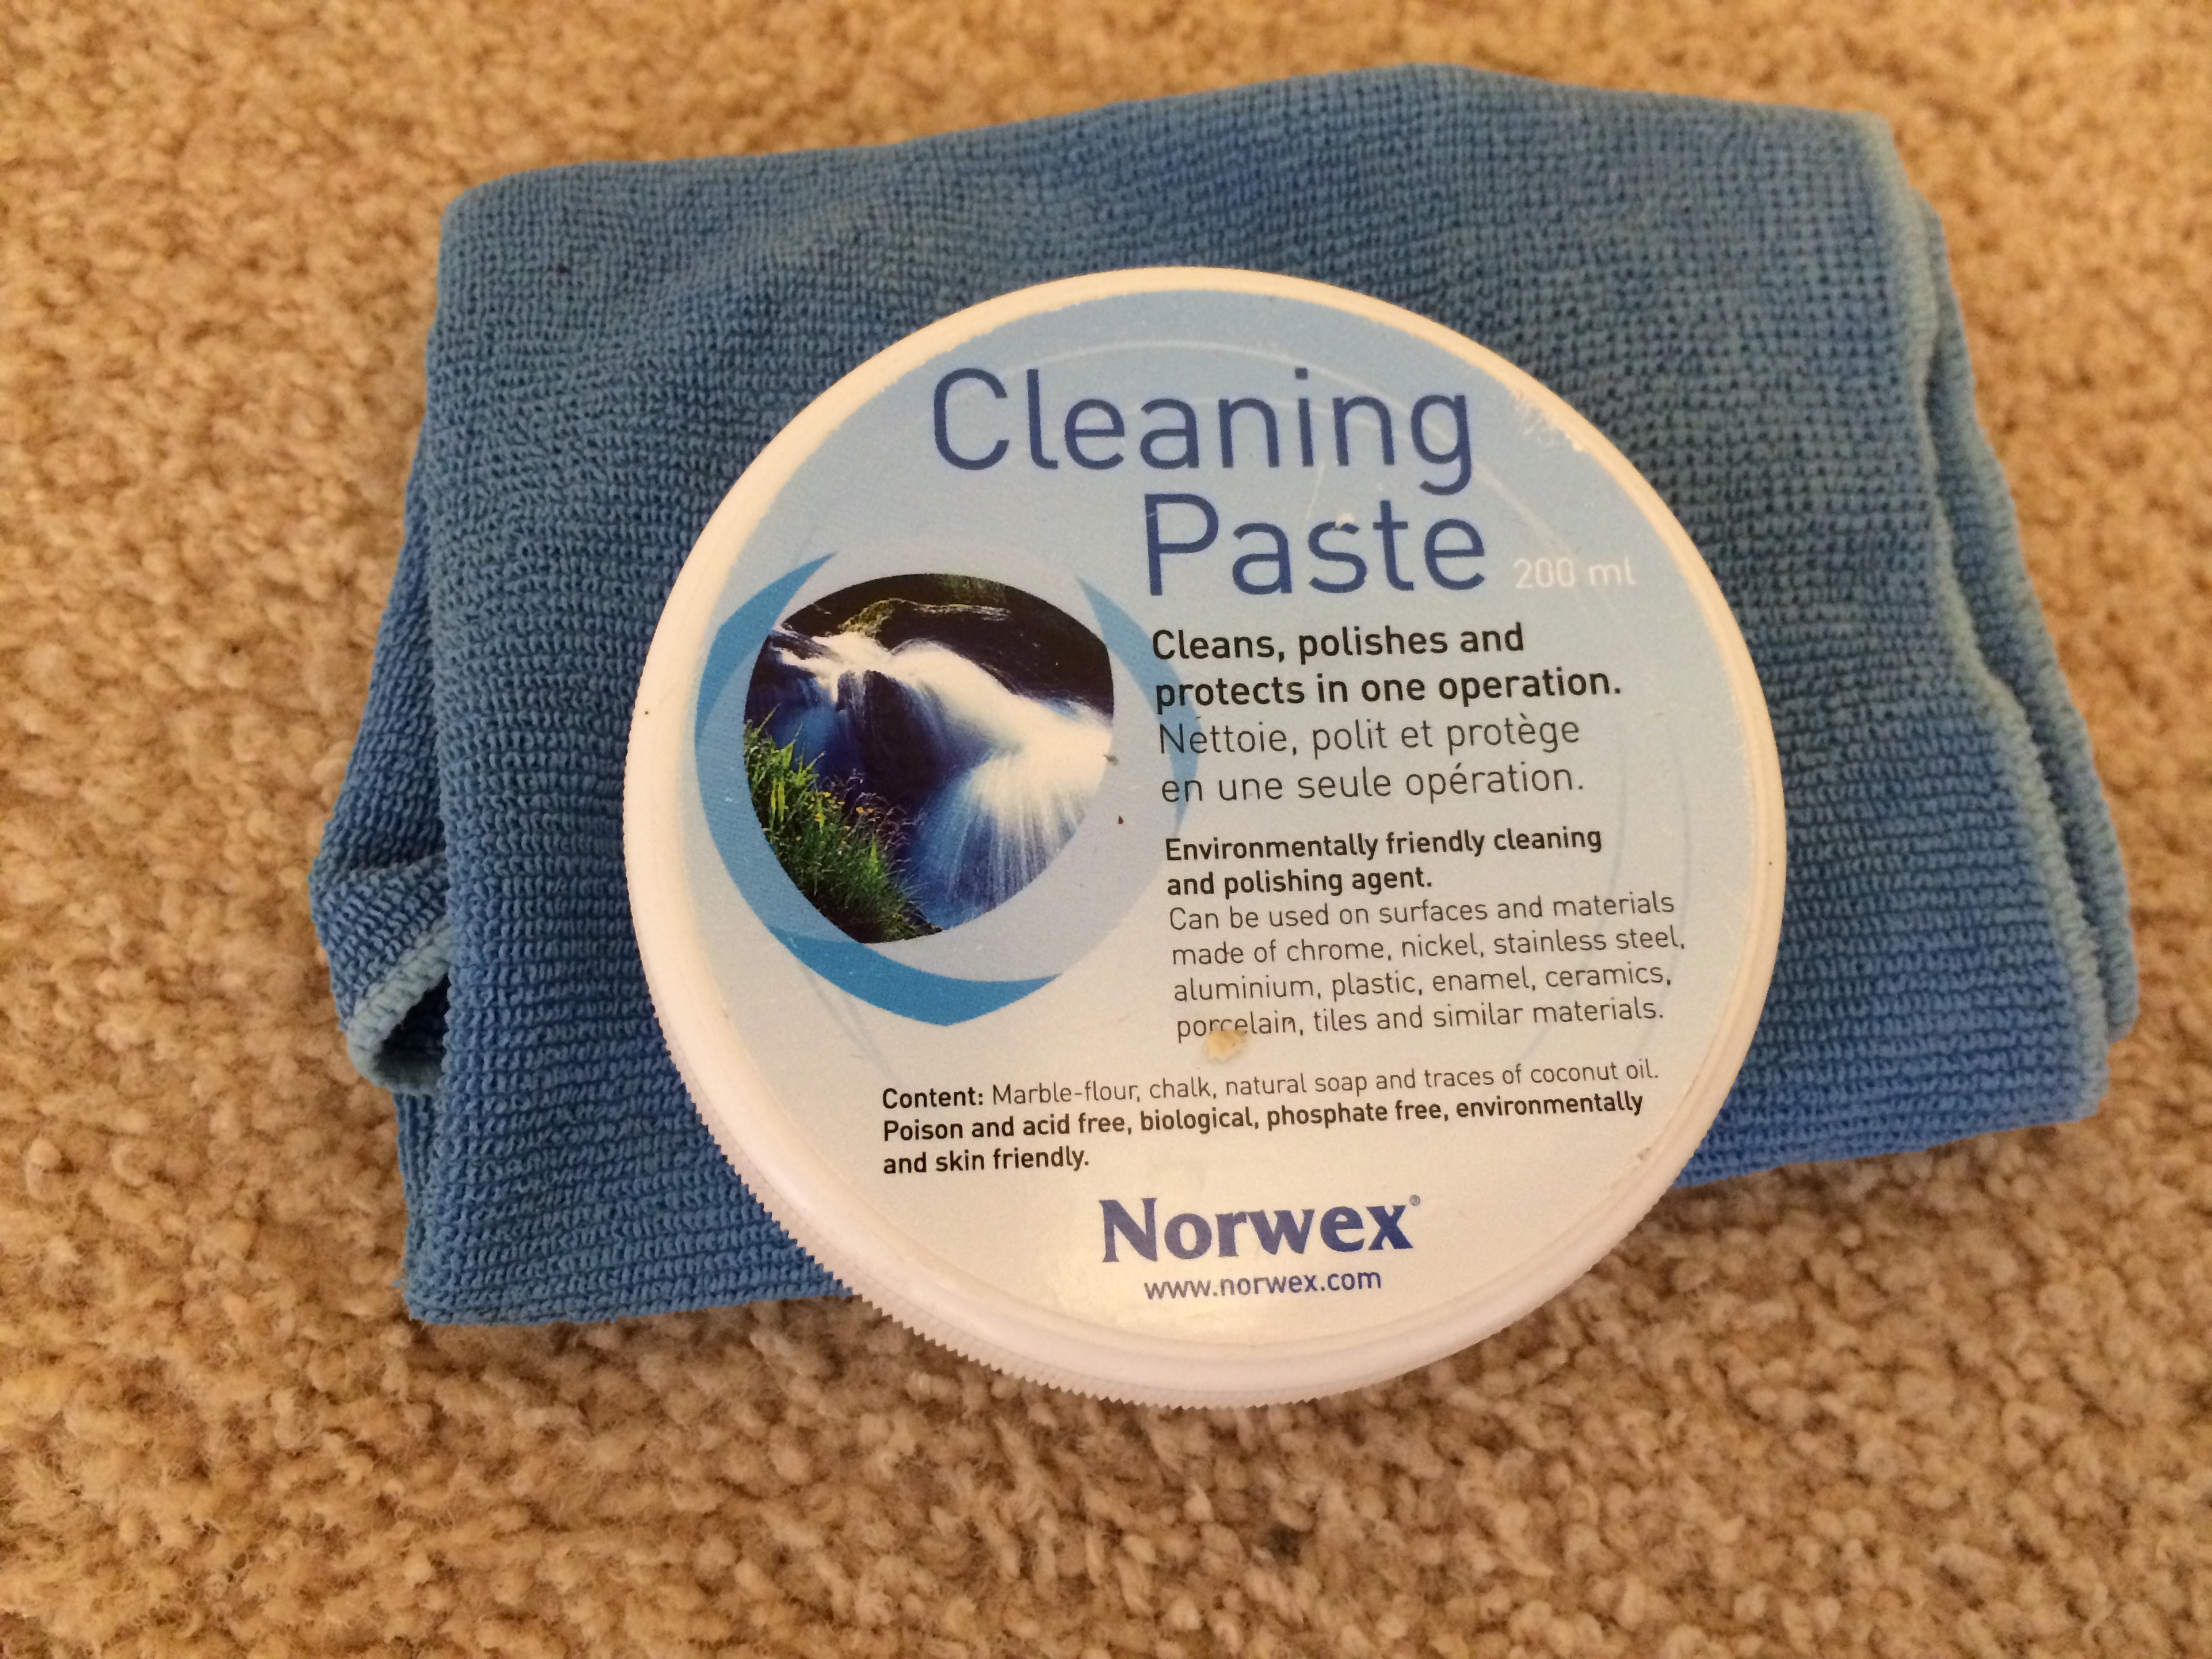 Kitchen Cleaning Made Easy With Norwex!